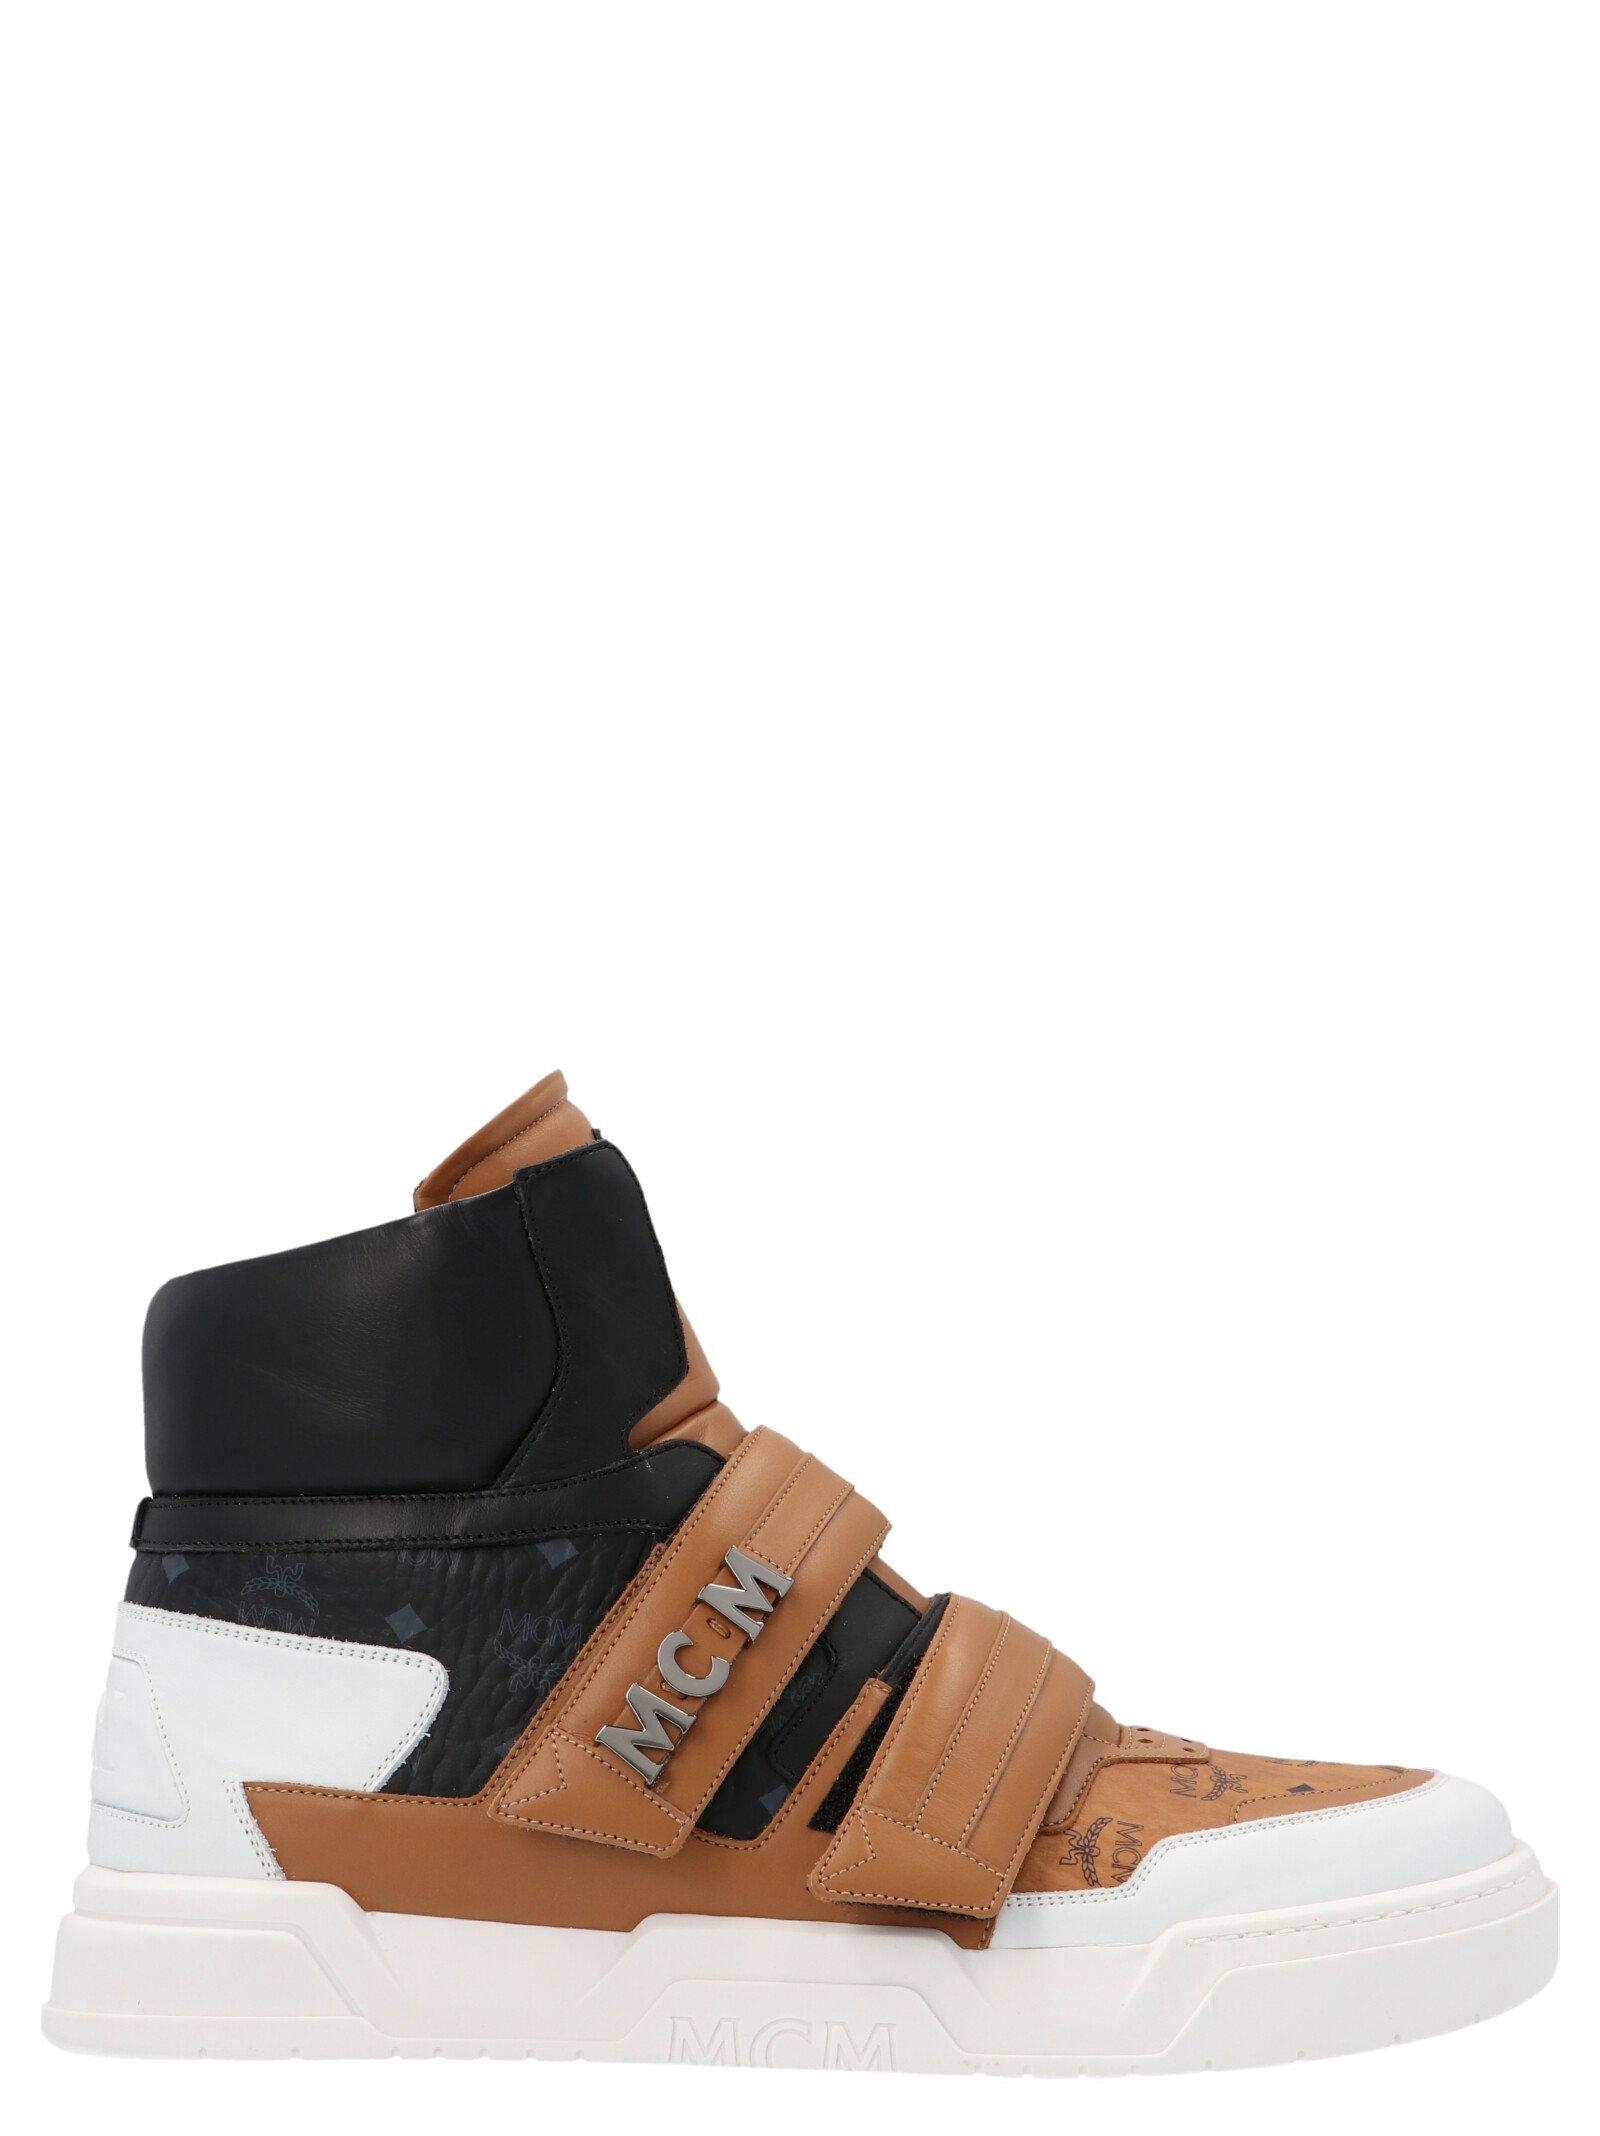 MCM Velcro Strap High Top Sneakers for Men | Lyst